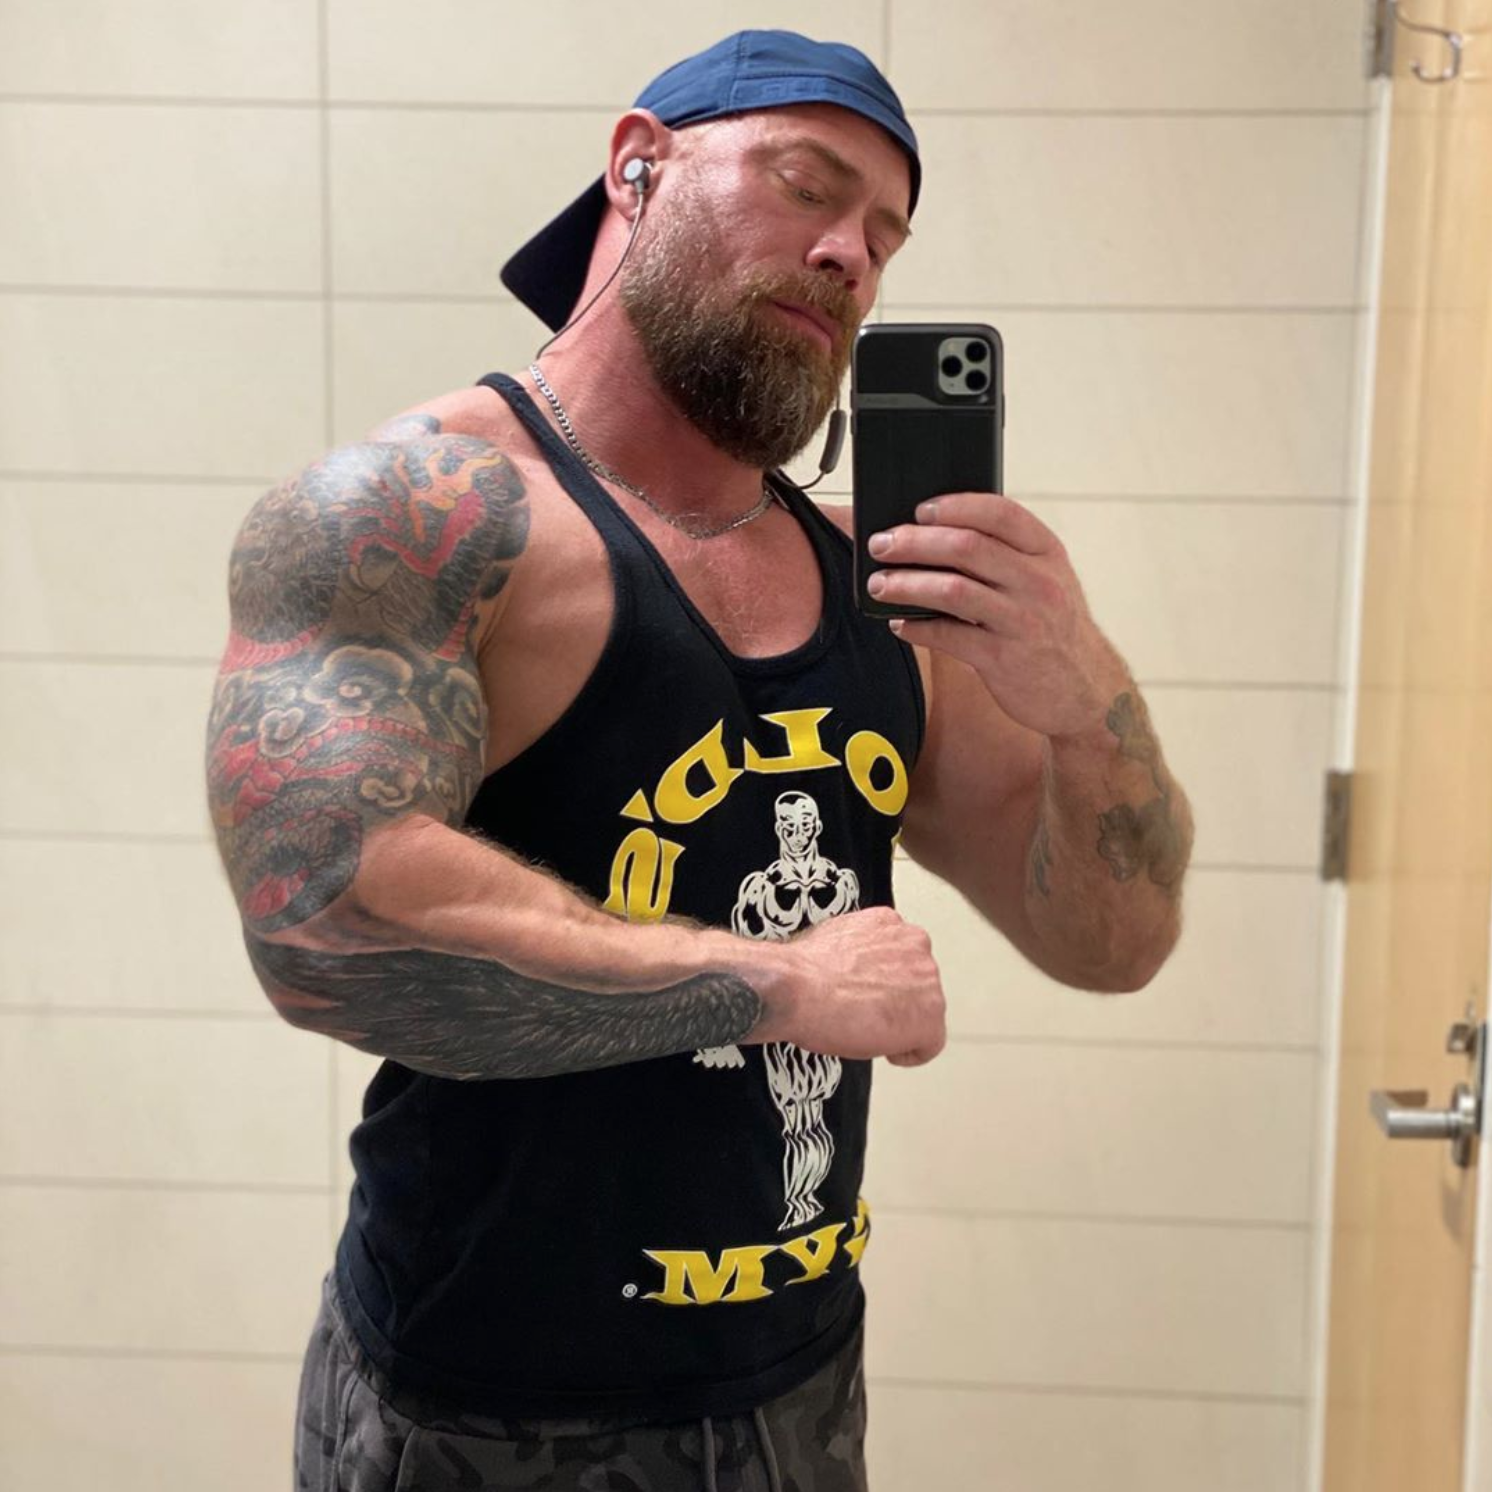 Mike Shultz flexing in a tank top before getting COVID-19